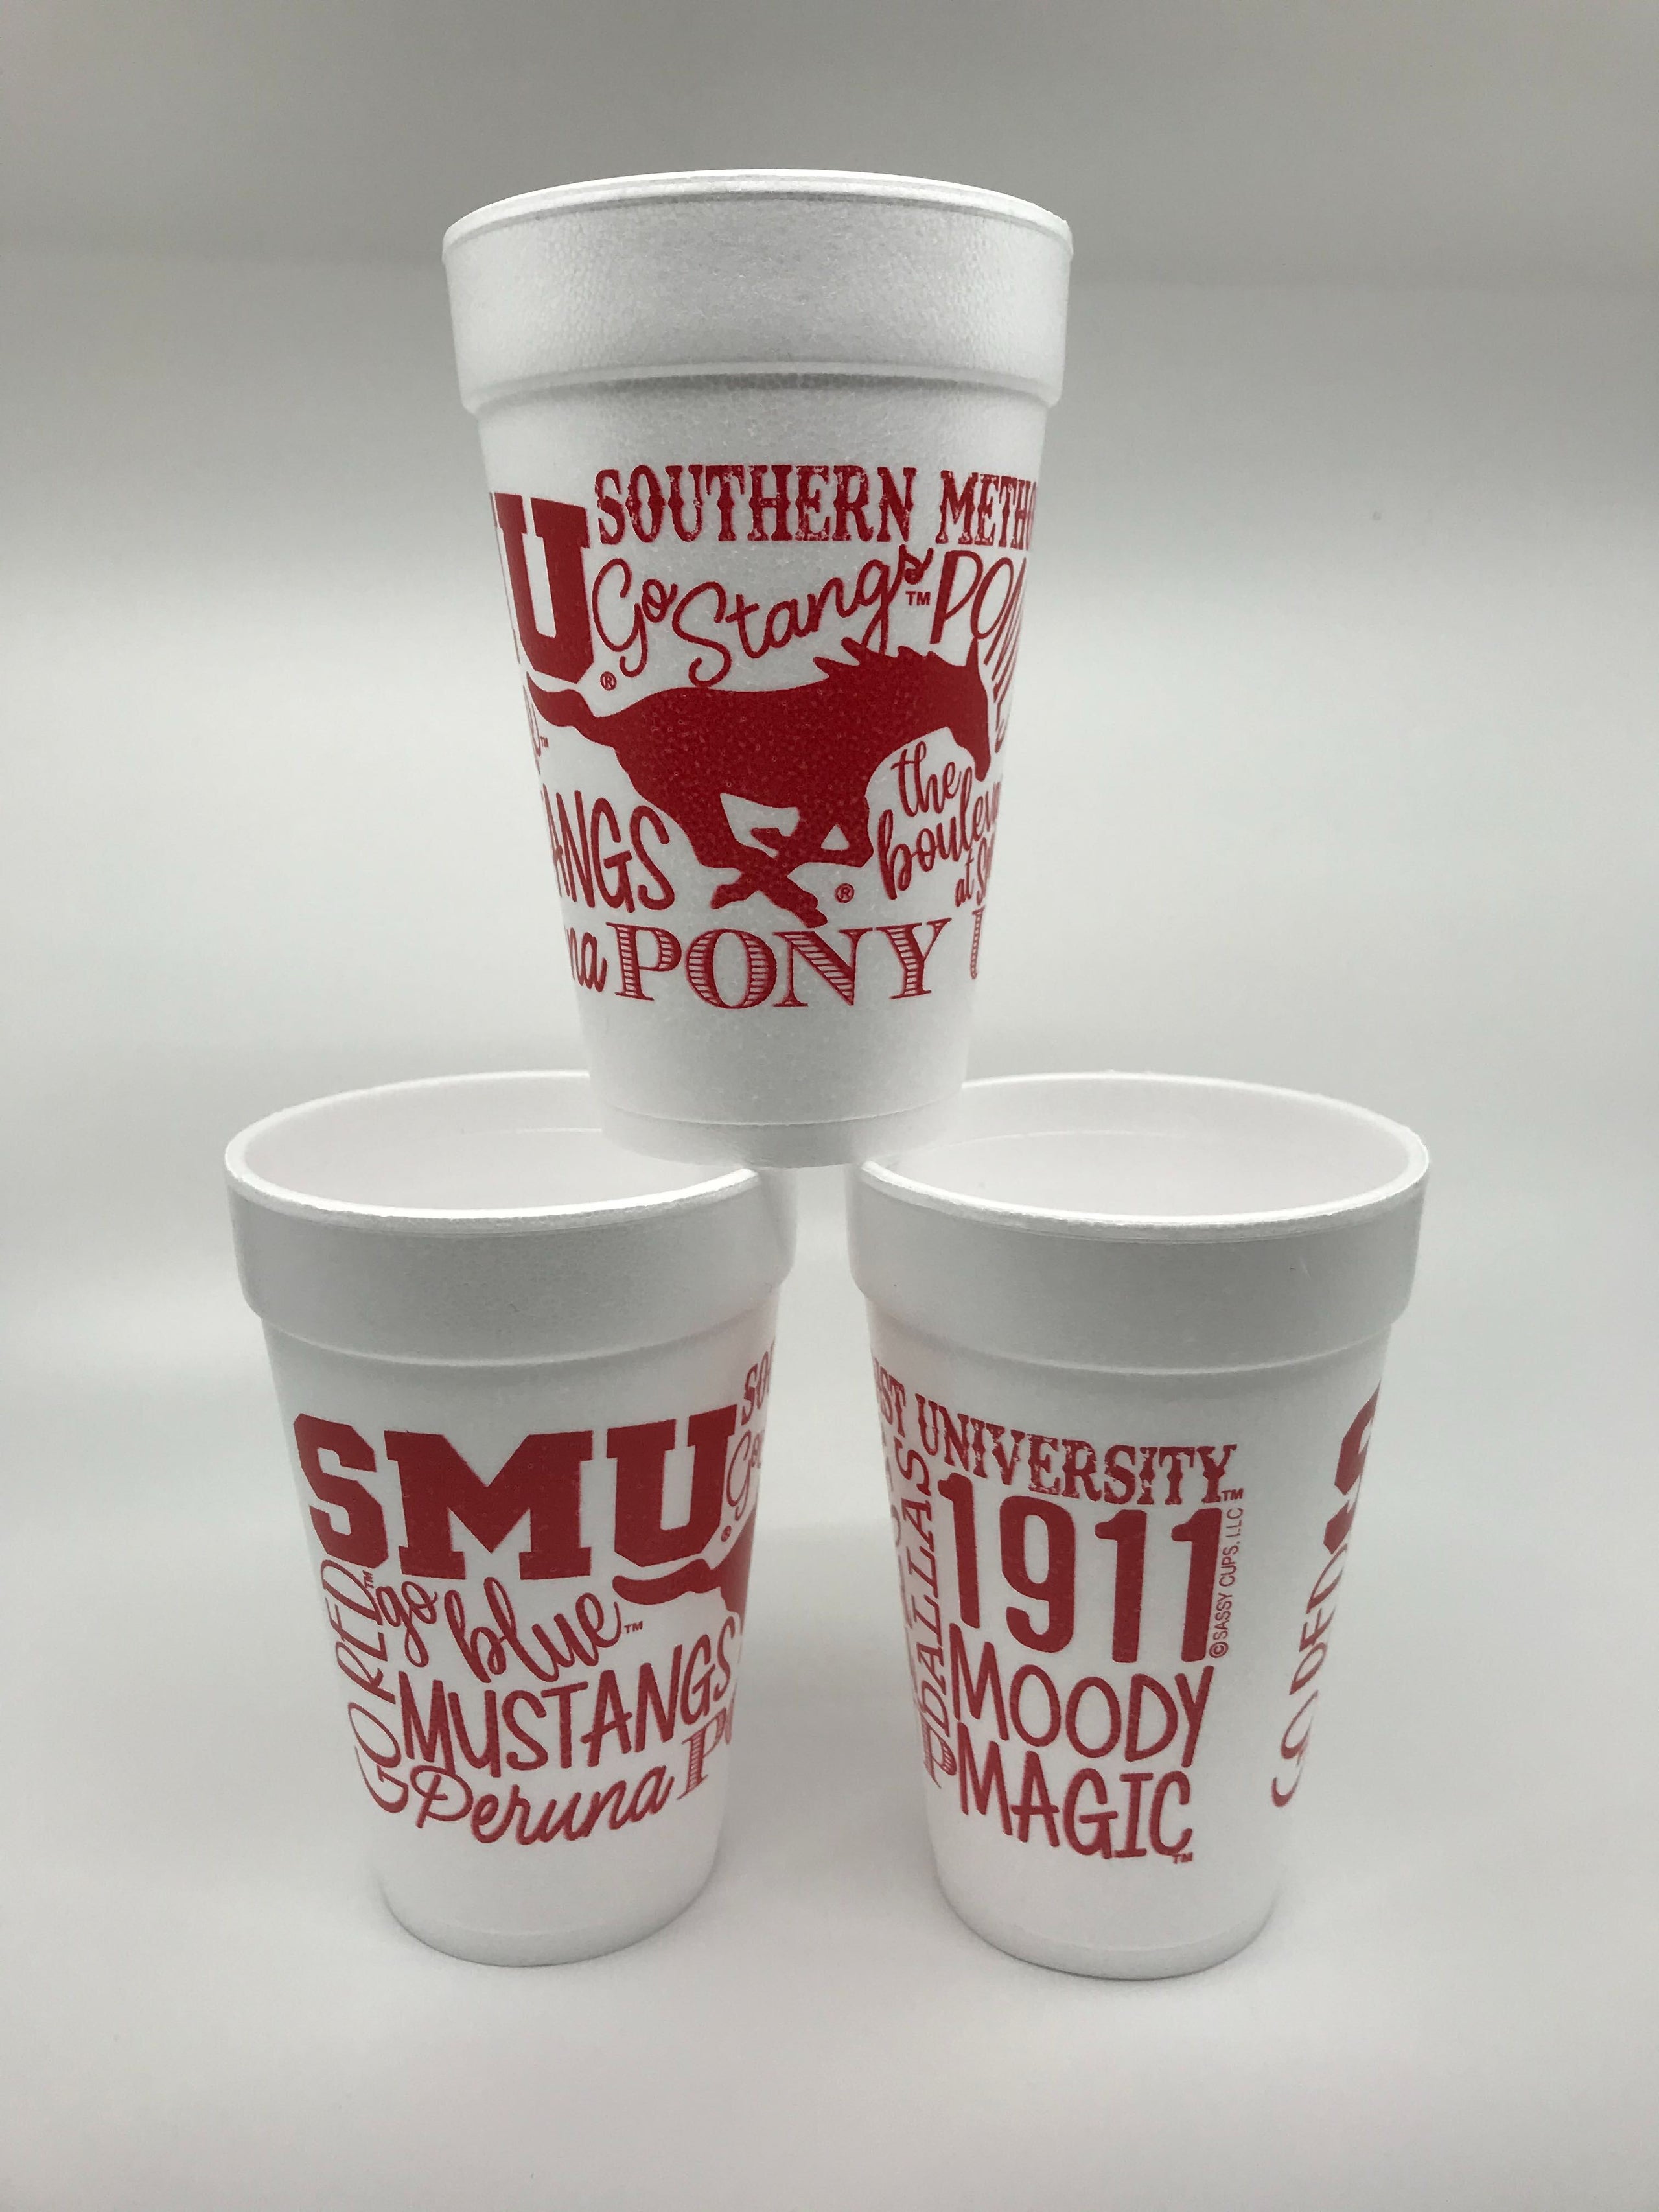 Coffee Timeline - 16oz Styrofoam Cups – Mildred and Mable's